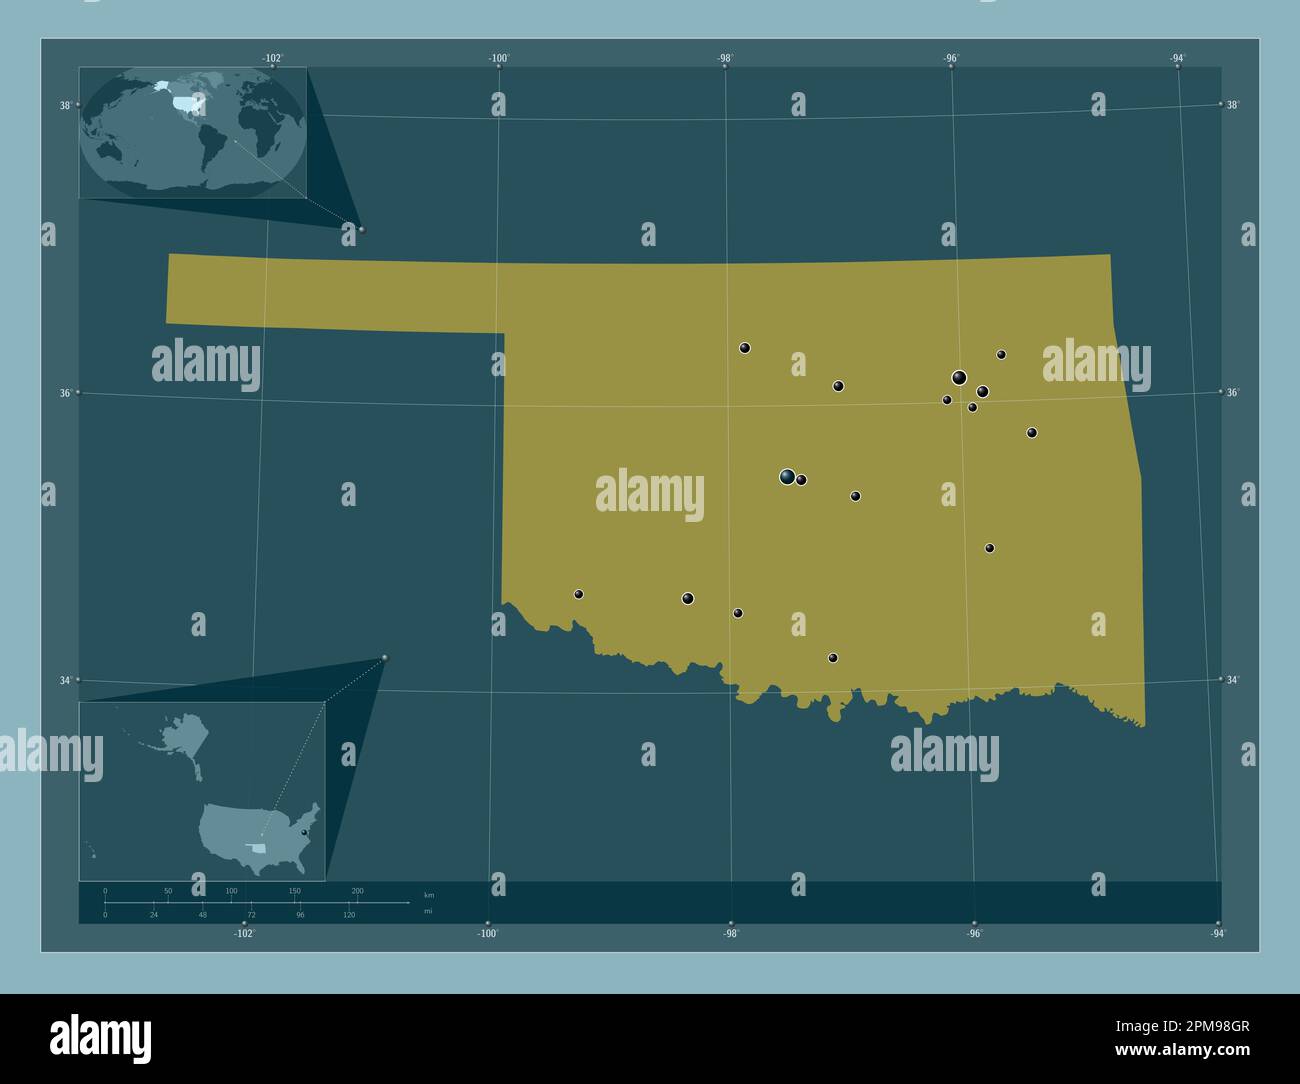 Oklahoma, state of United States of America. Solid color shape. Locations of major cities of the region. Corner auxiliary location maps Stock Photo